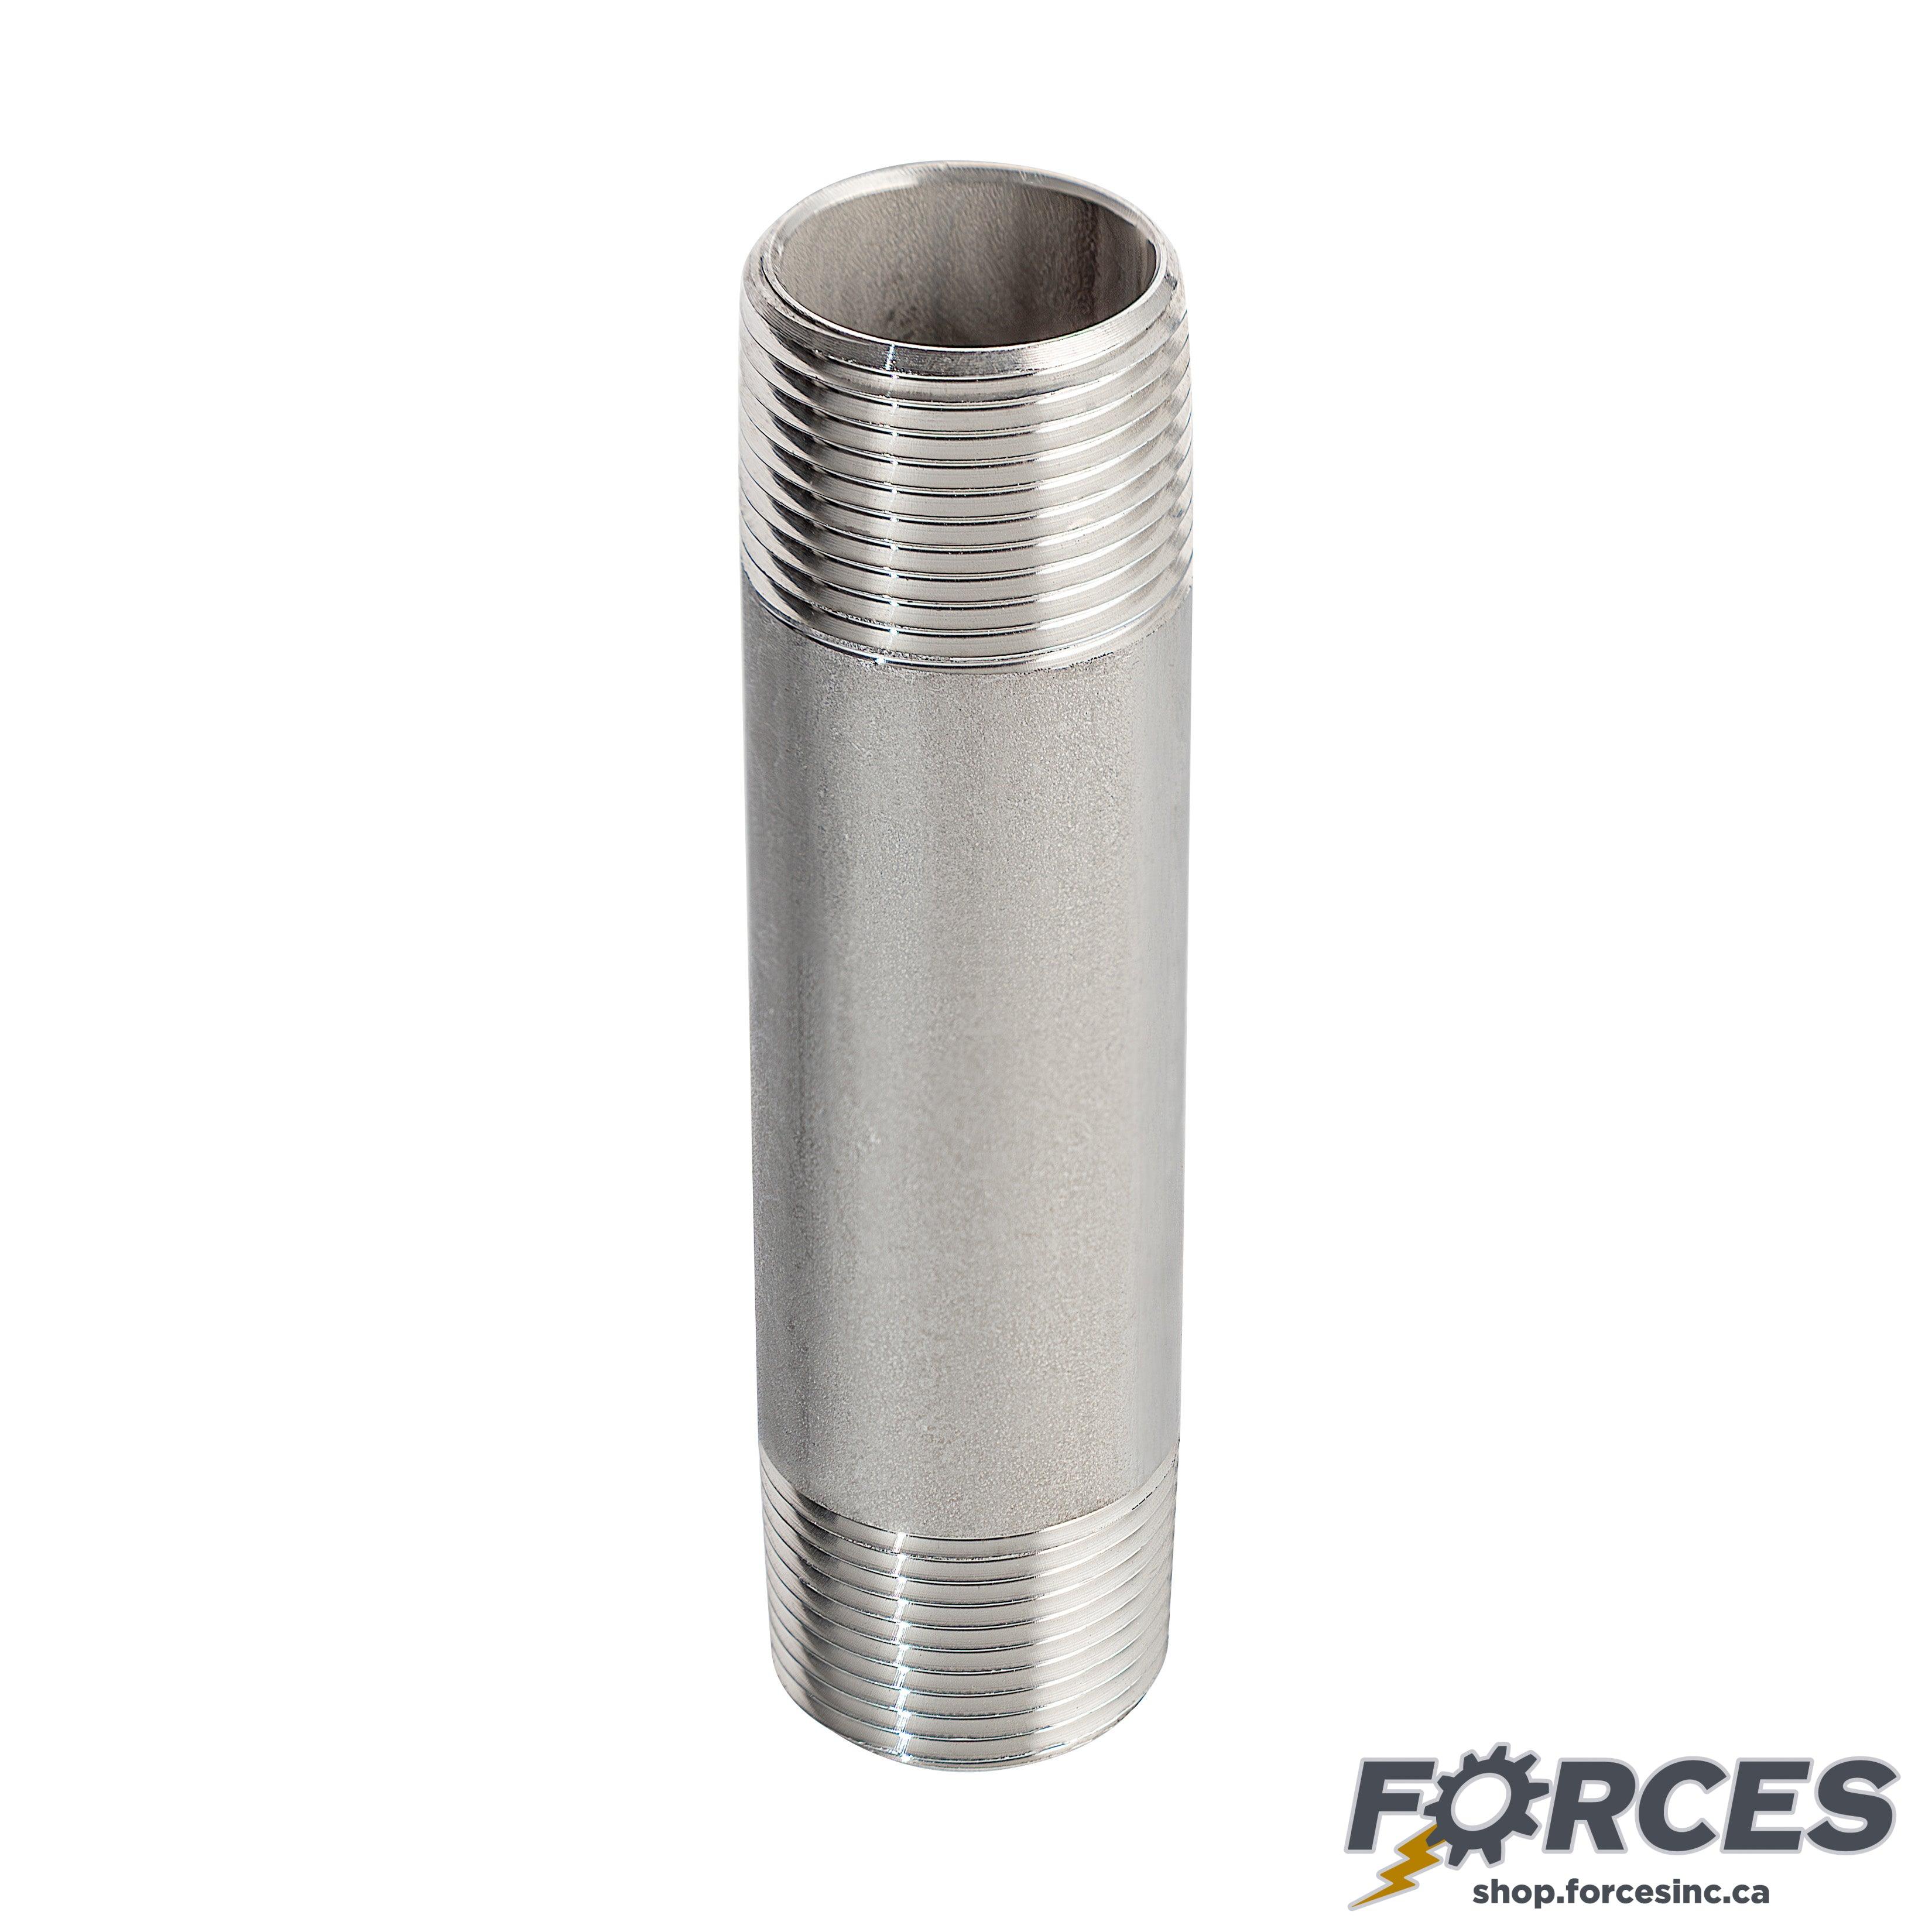 1/8" X 1-1/2" Long Nipple - Stainless Steel 316 - Forces Inc